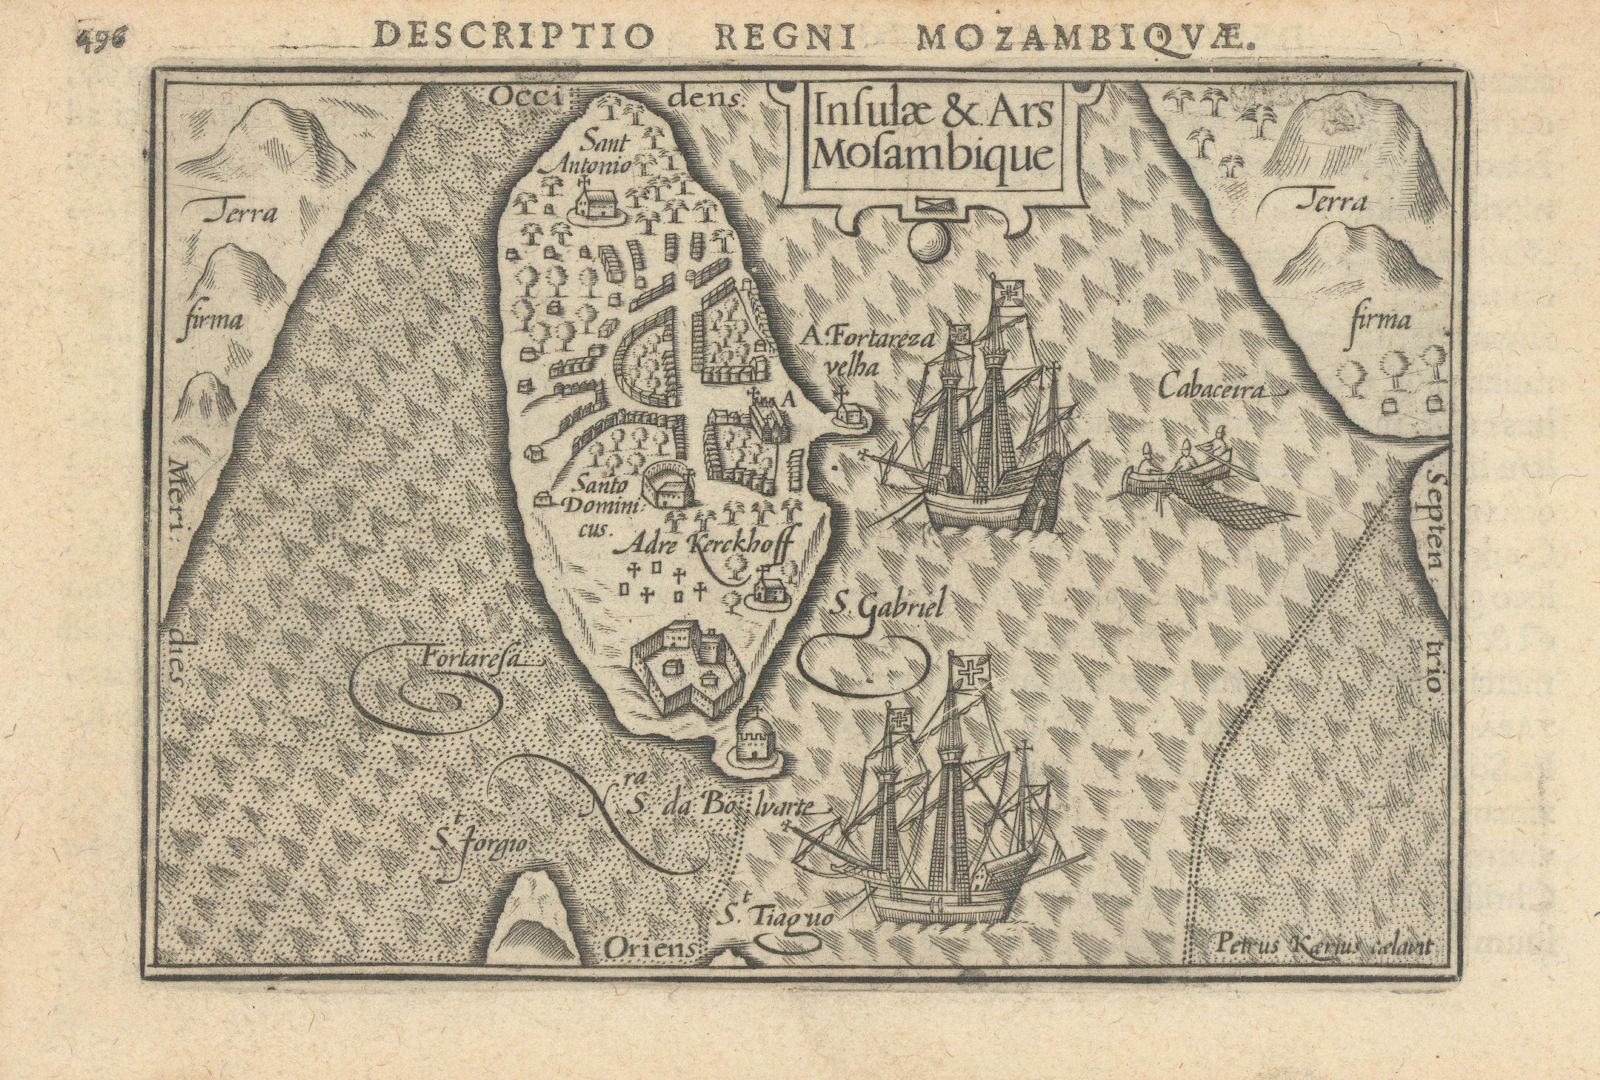 Insulae & Ars Mozambique by Bertius / Langenes. Mozambique Island 1603 old map